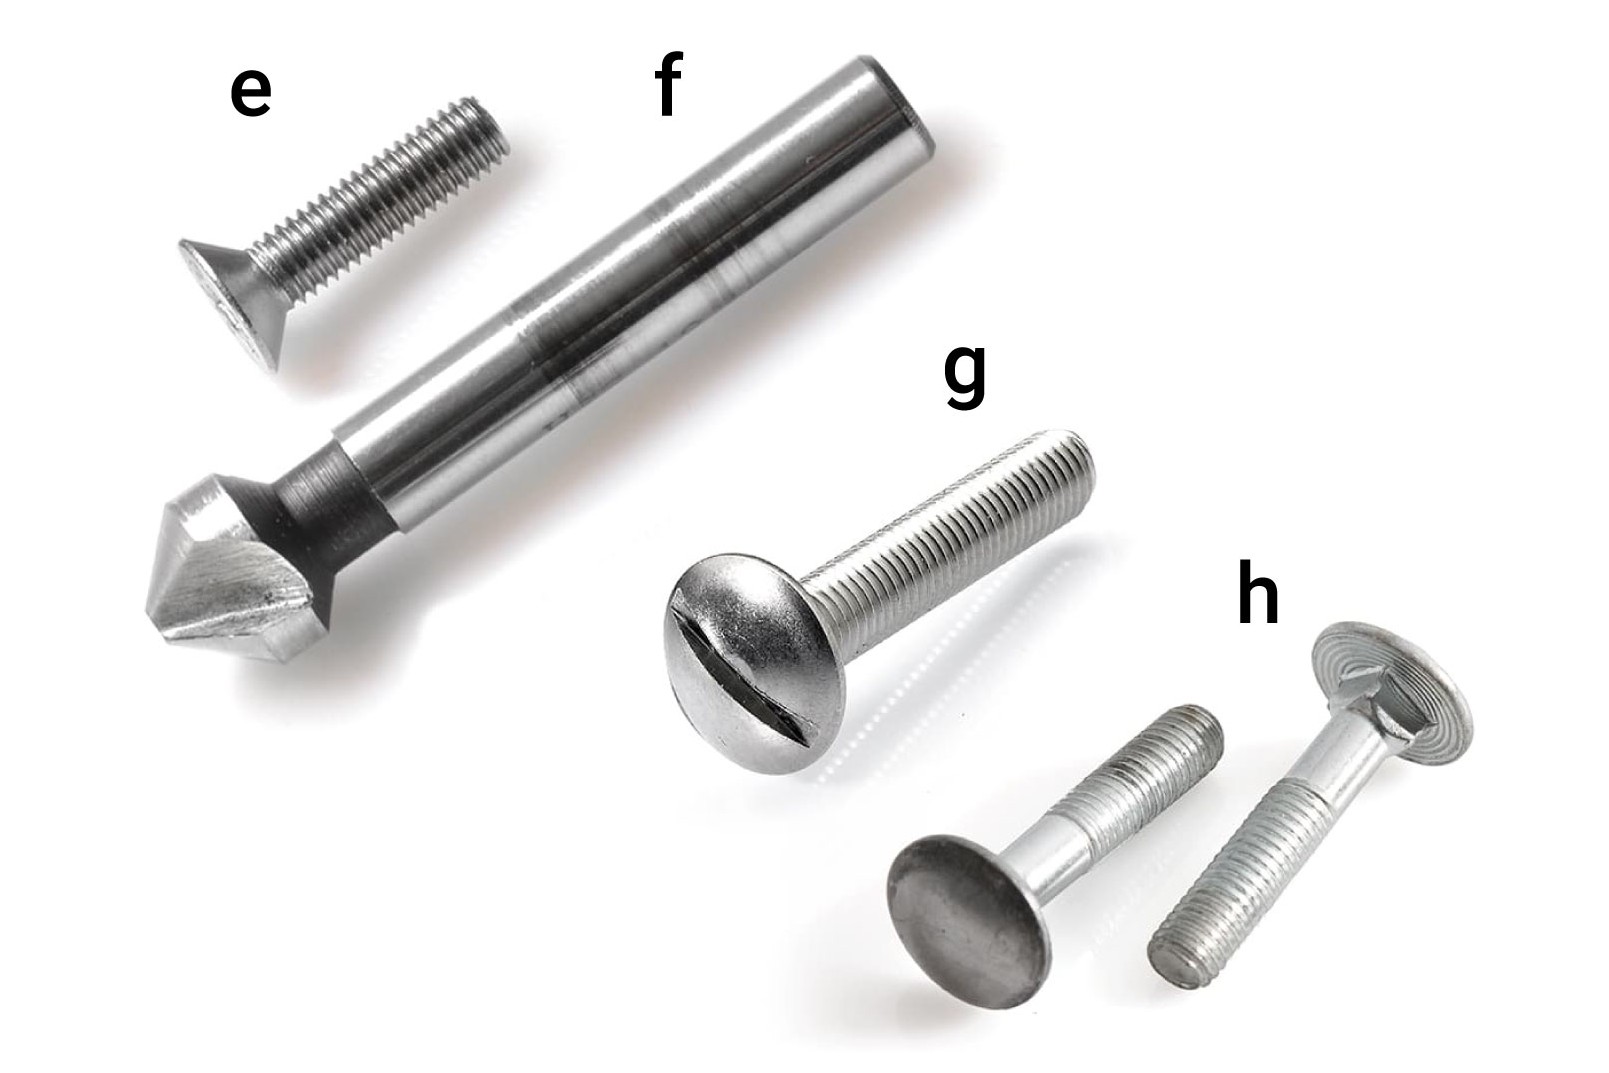 Fig. 2.2: Overview of screws